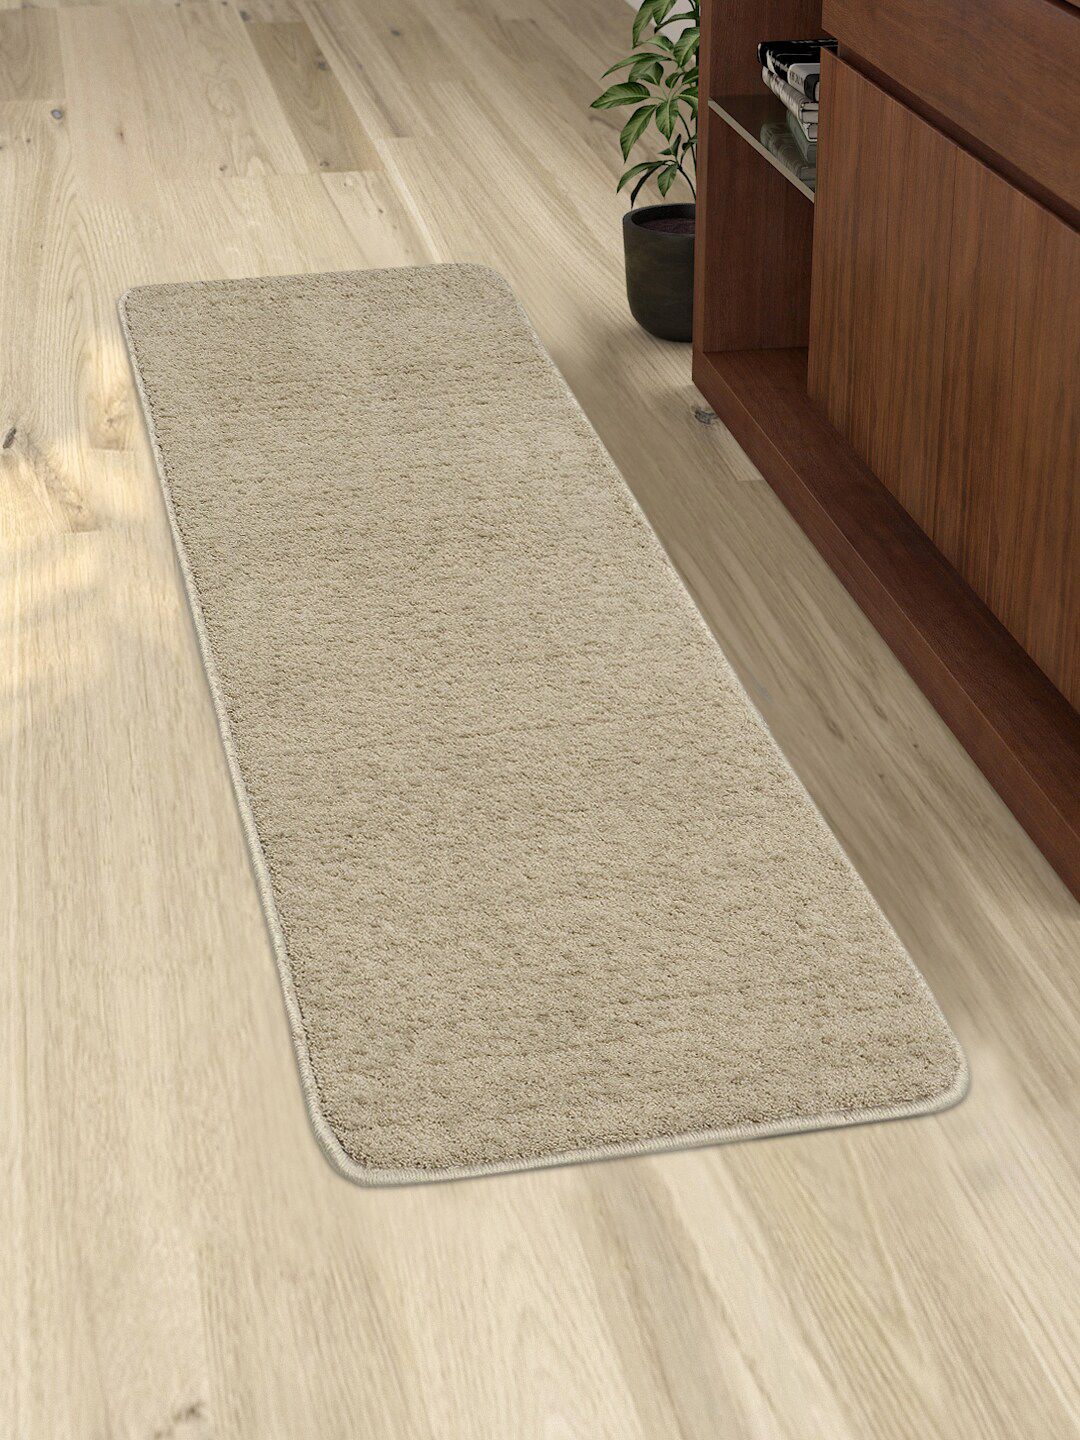 Saral Home Beige Solid Shaggy Anti-Skid Floor Runner Price in India